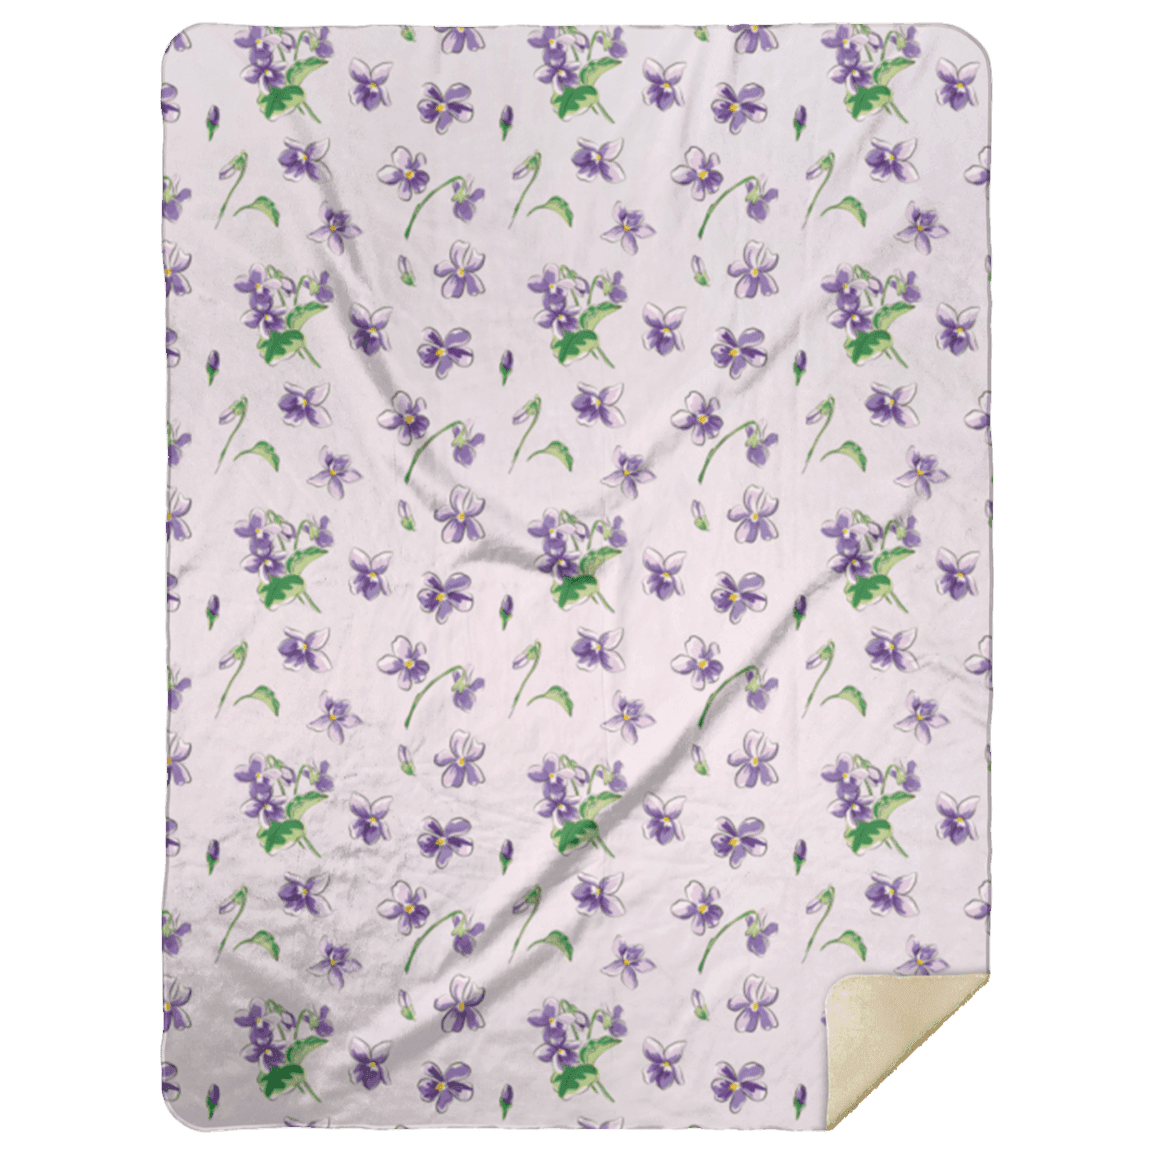 Soft plush throw blanket with a pattern of delicate violets and green leaves on a white background, 60x80 inches.